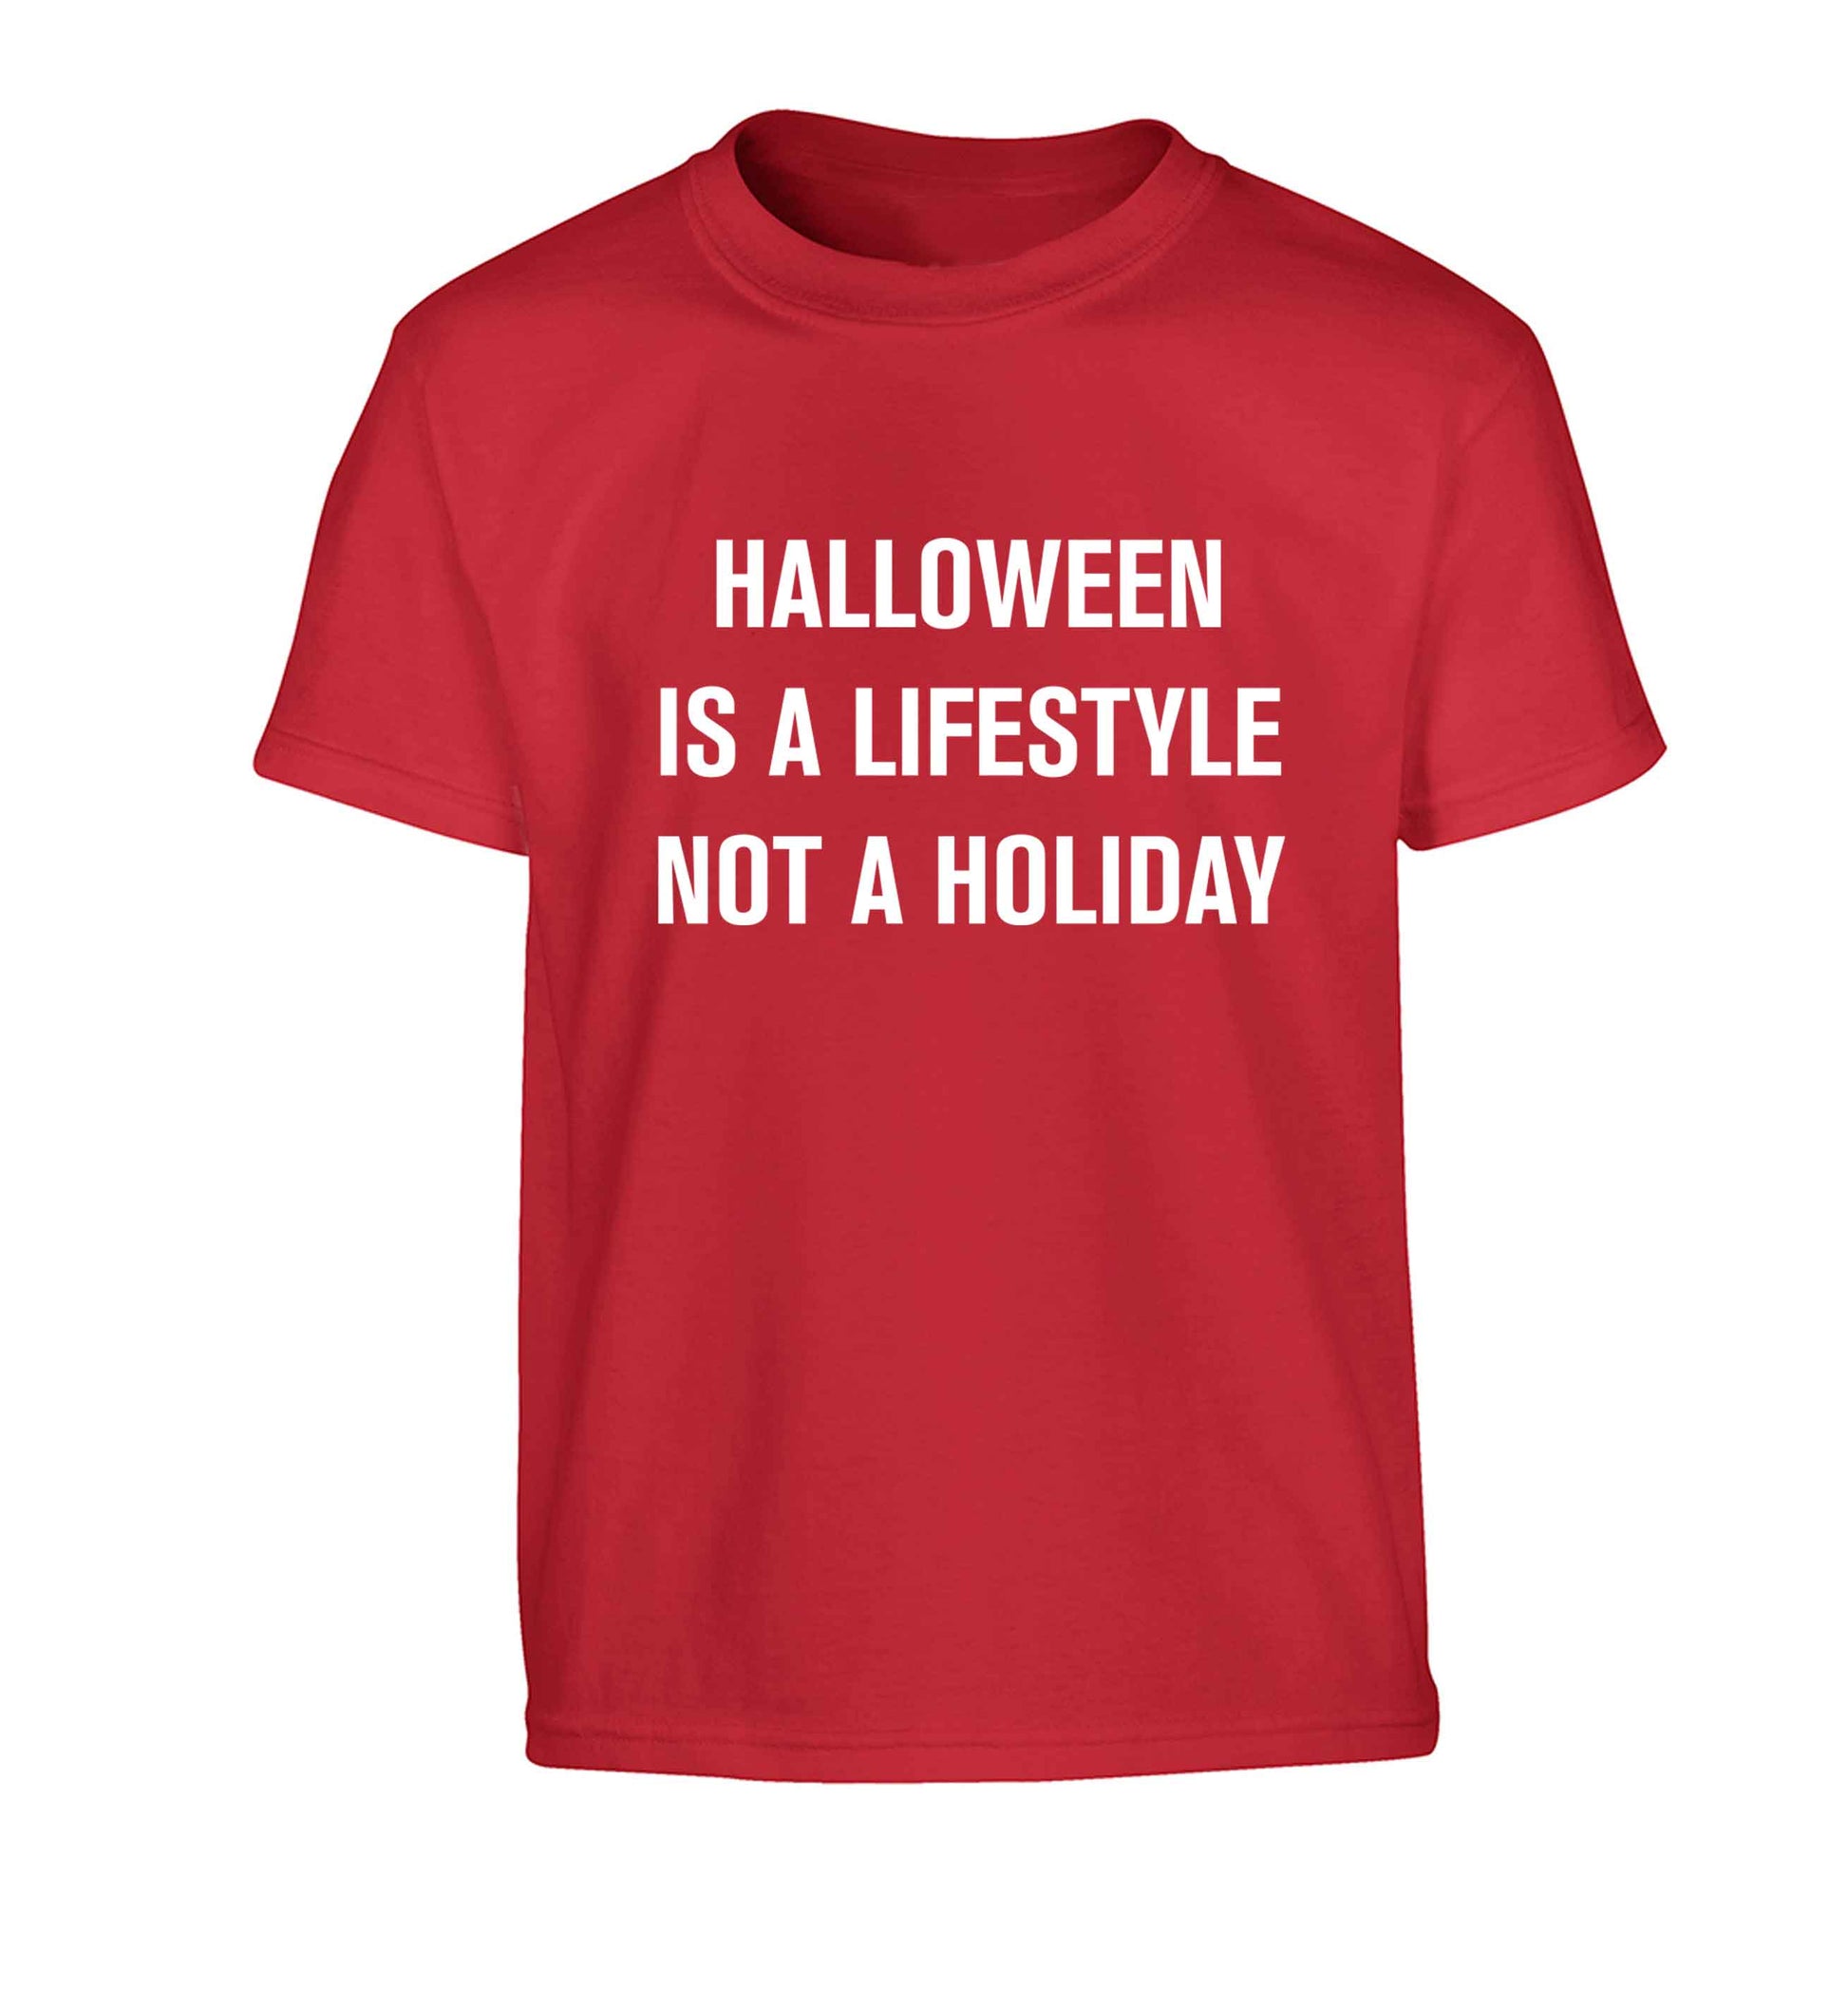 Halloween is a lifestyle not a holiday Children's red Tshirt 12-13 Years